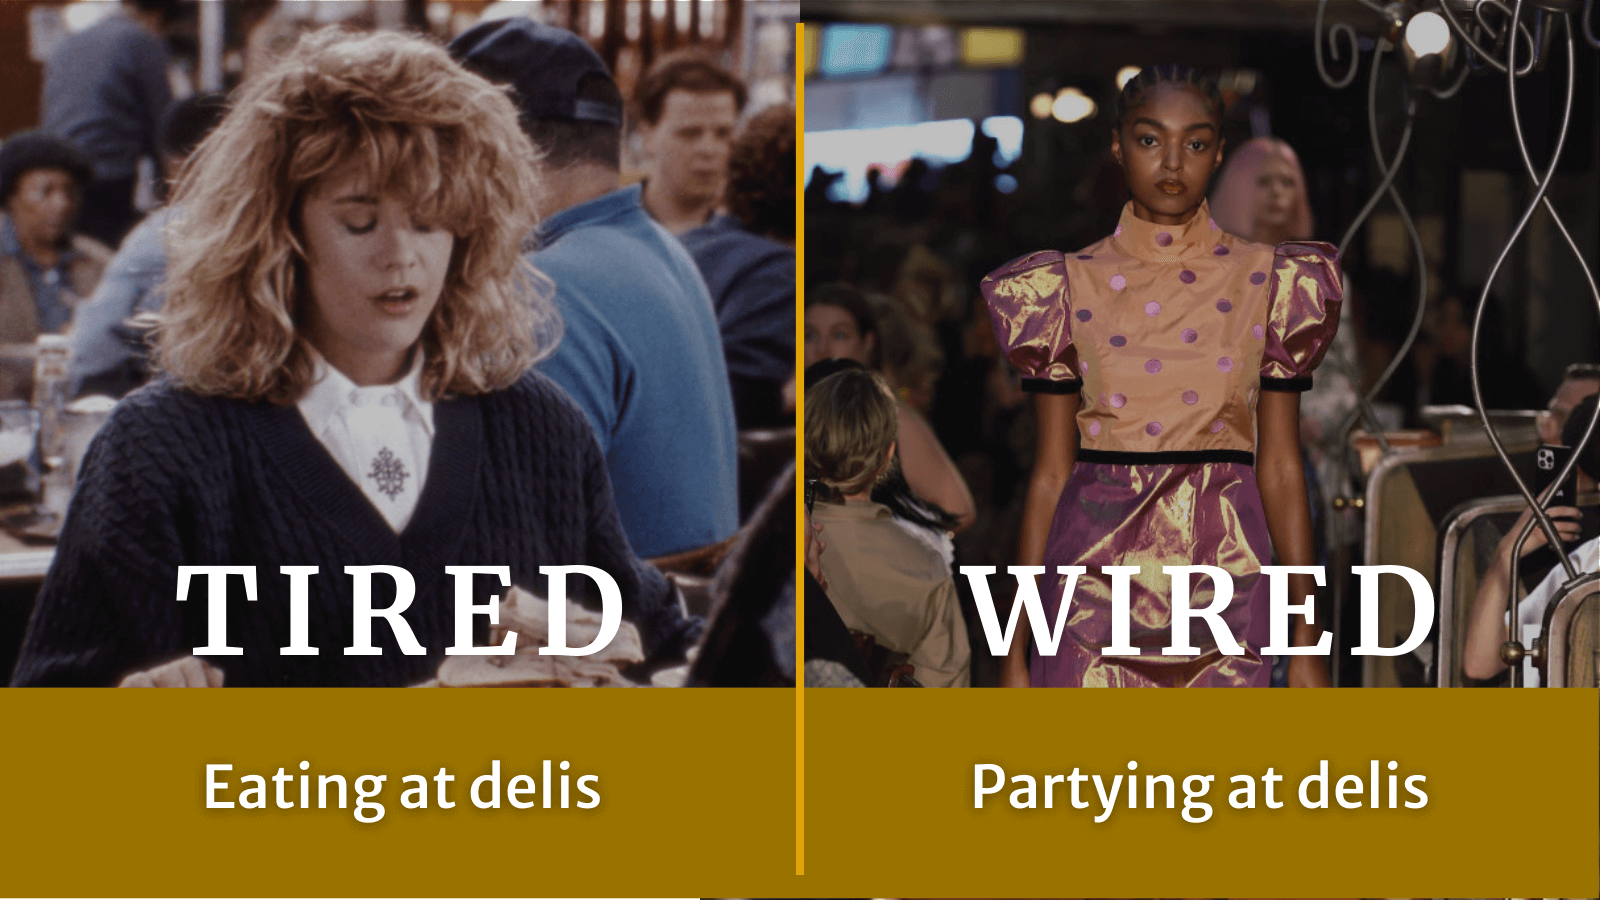 Tired: Eating at delis. Wired: Partying at delis.